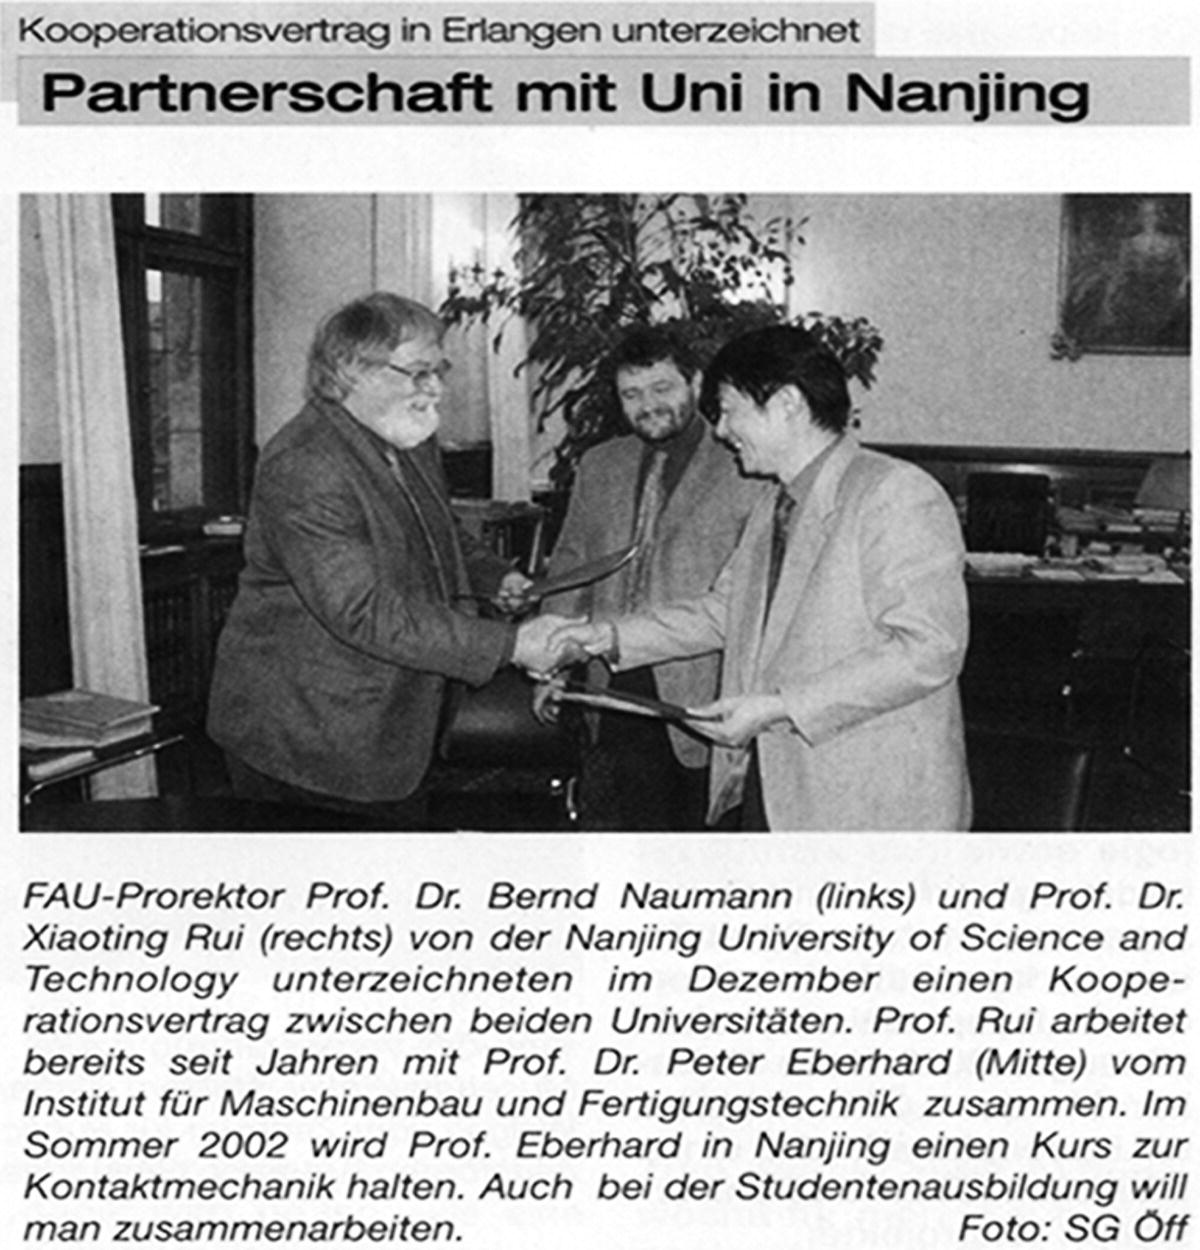 Snipped image from a newspaper, displaying Professor Xiaoting Rui (right) and the president of Erlangen-Nurnberg University (left) shaking hands. To the right of Professor Xiaoting Rui is another man smiling.